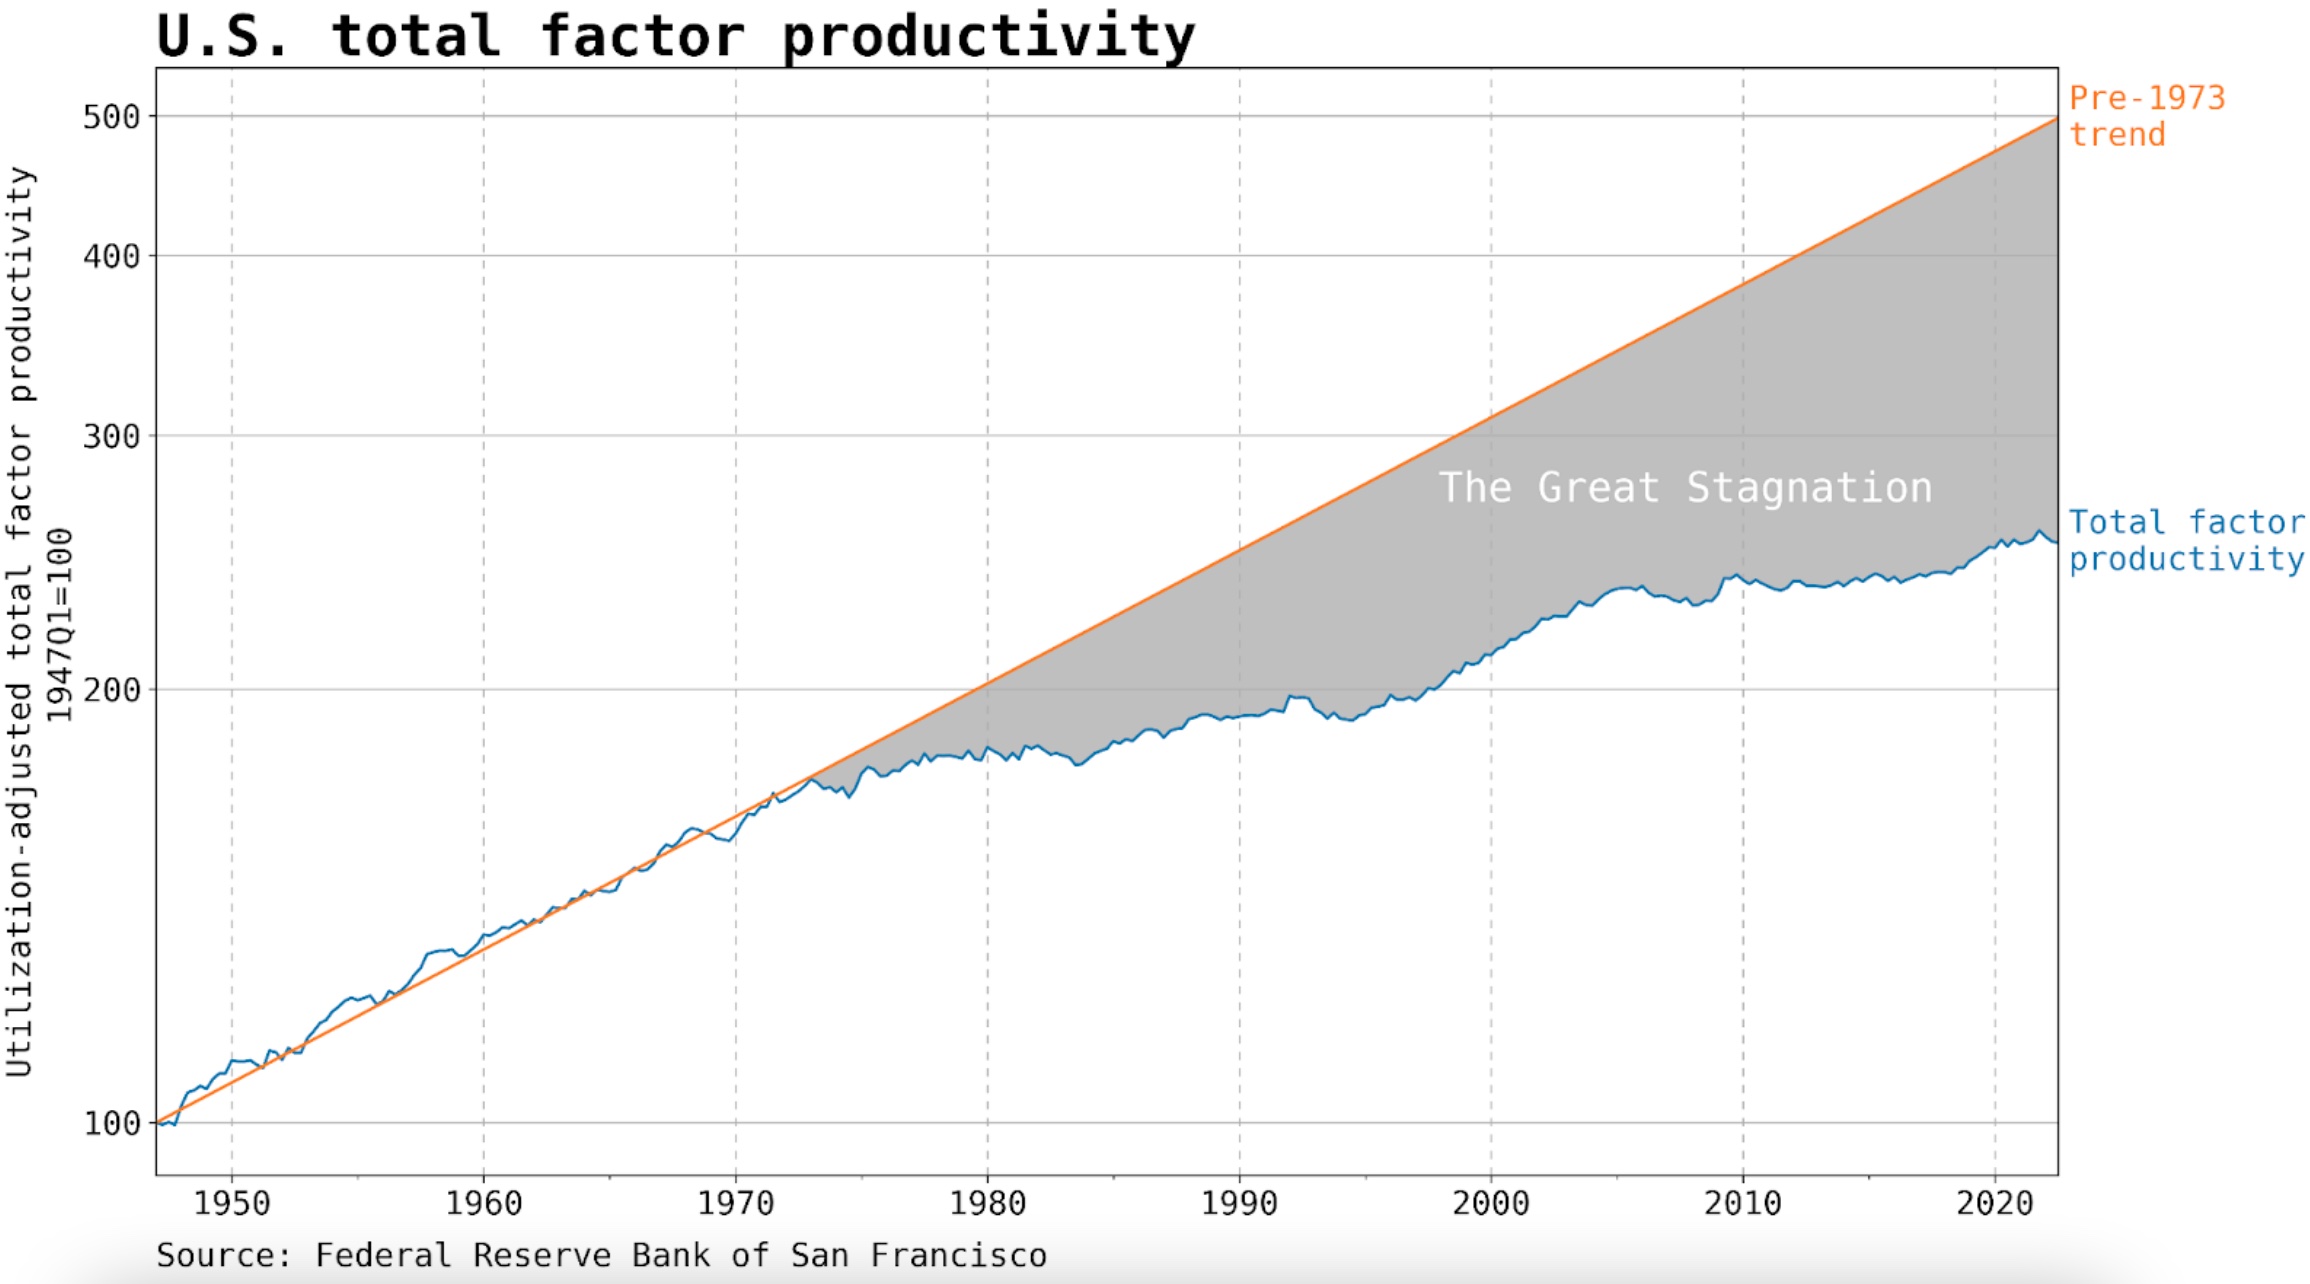 Graph showing U.S. total factor productivity from 1900 to 2020. The blue line indicates actual productivity, and the orange line shows the pre-1973 trend. The area between reflects "The Great Stagnation.